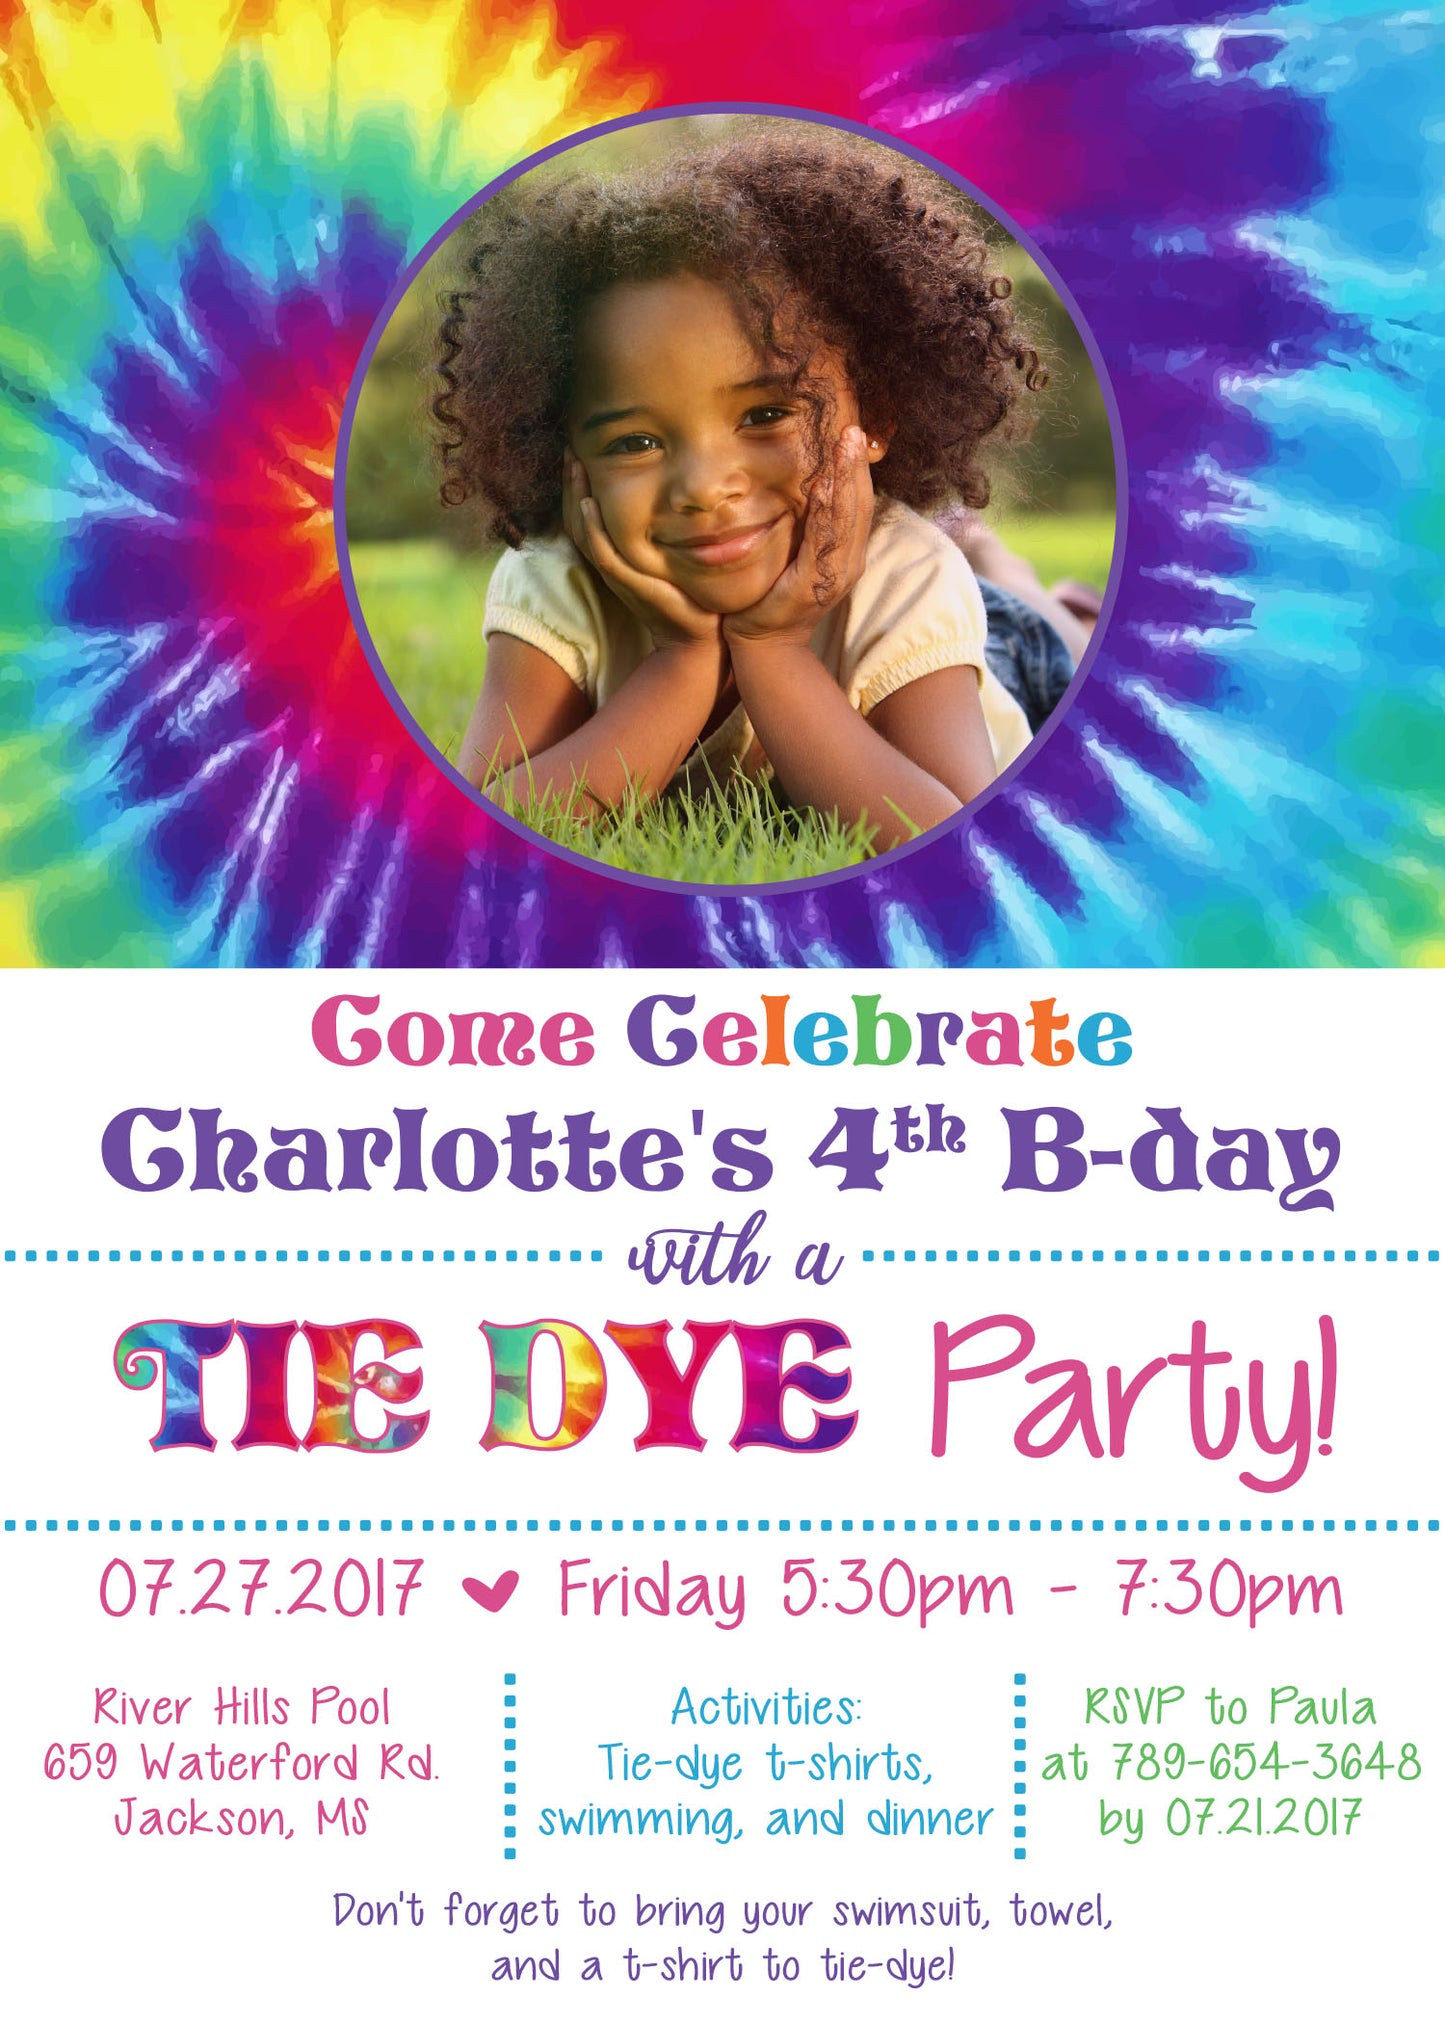 TIE DYE PARTY Birthday Invitation with or without Photo - Printed or Digital File!